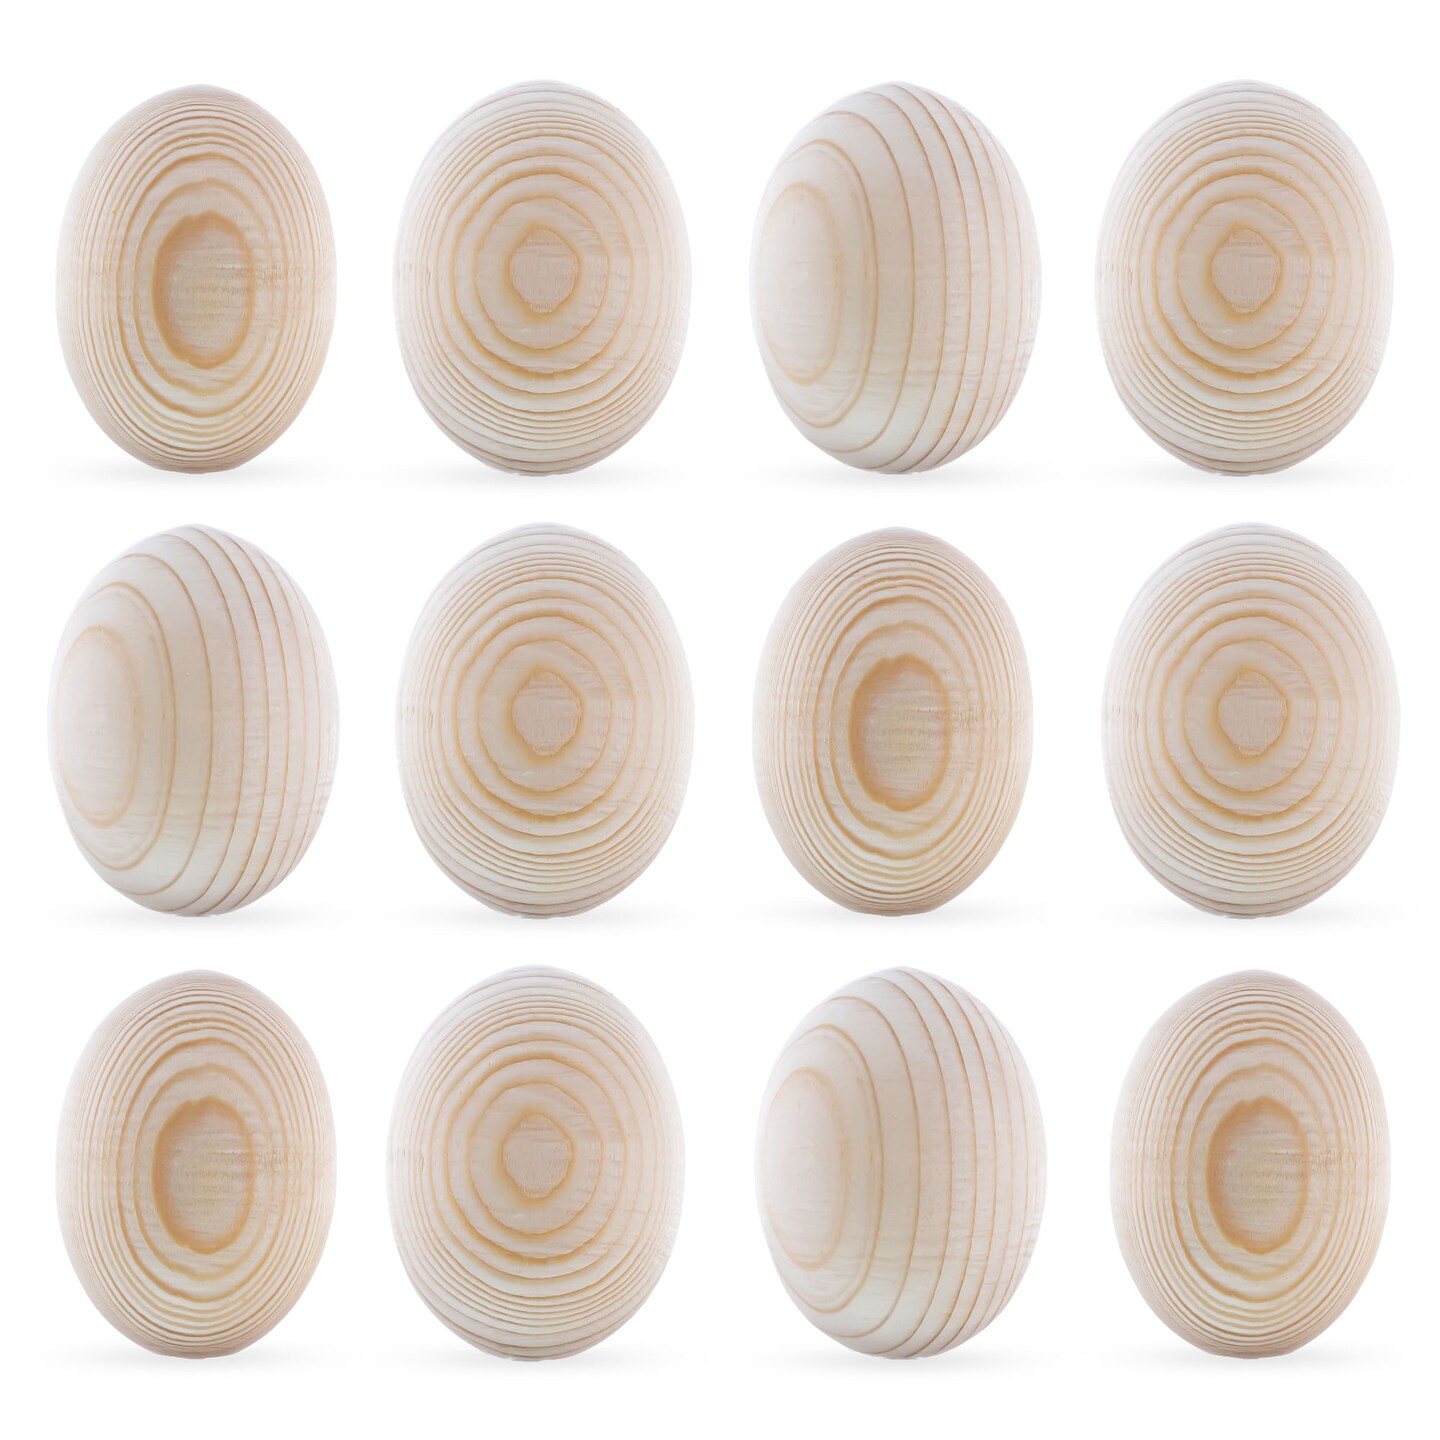 Set of 12 Unpainted Blank Unfinished Wooden Eggs 2.5 Inches